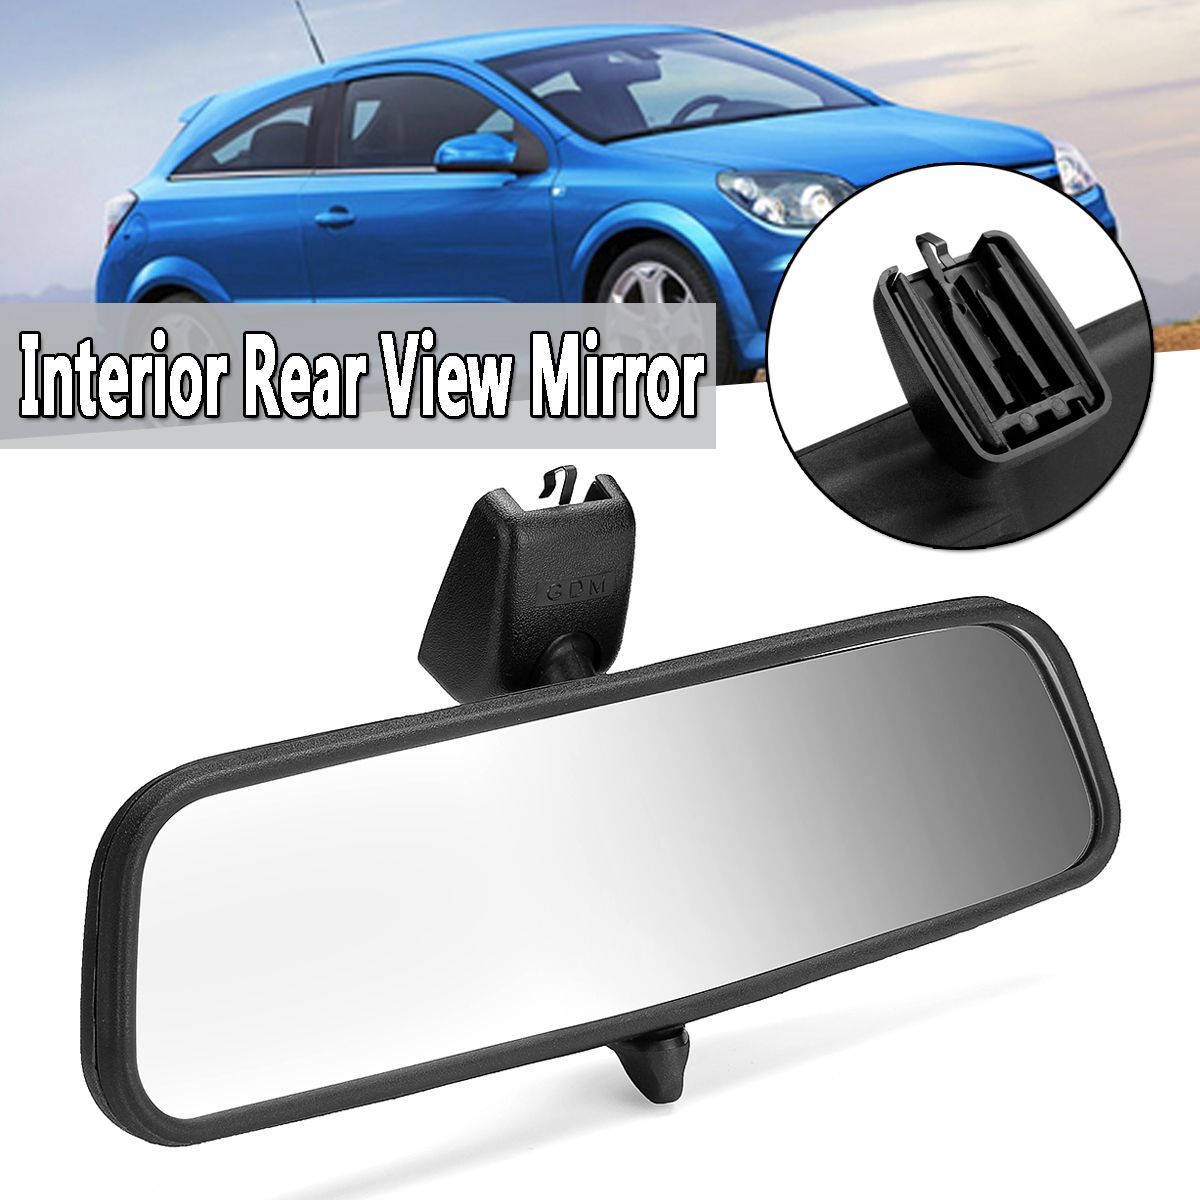 Car-Truck-Wide-Flat-Interior-View-Mirrors-Rearview-for-Original-GM-Opel-Astra-AU-1372557